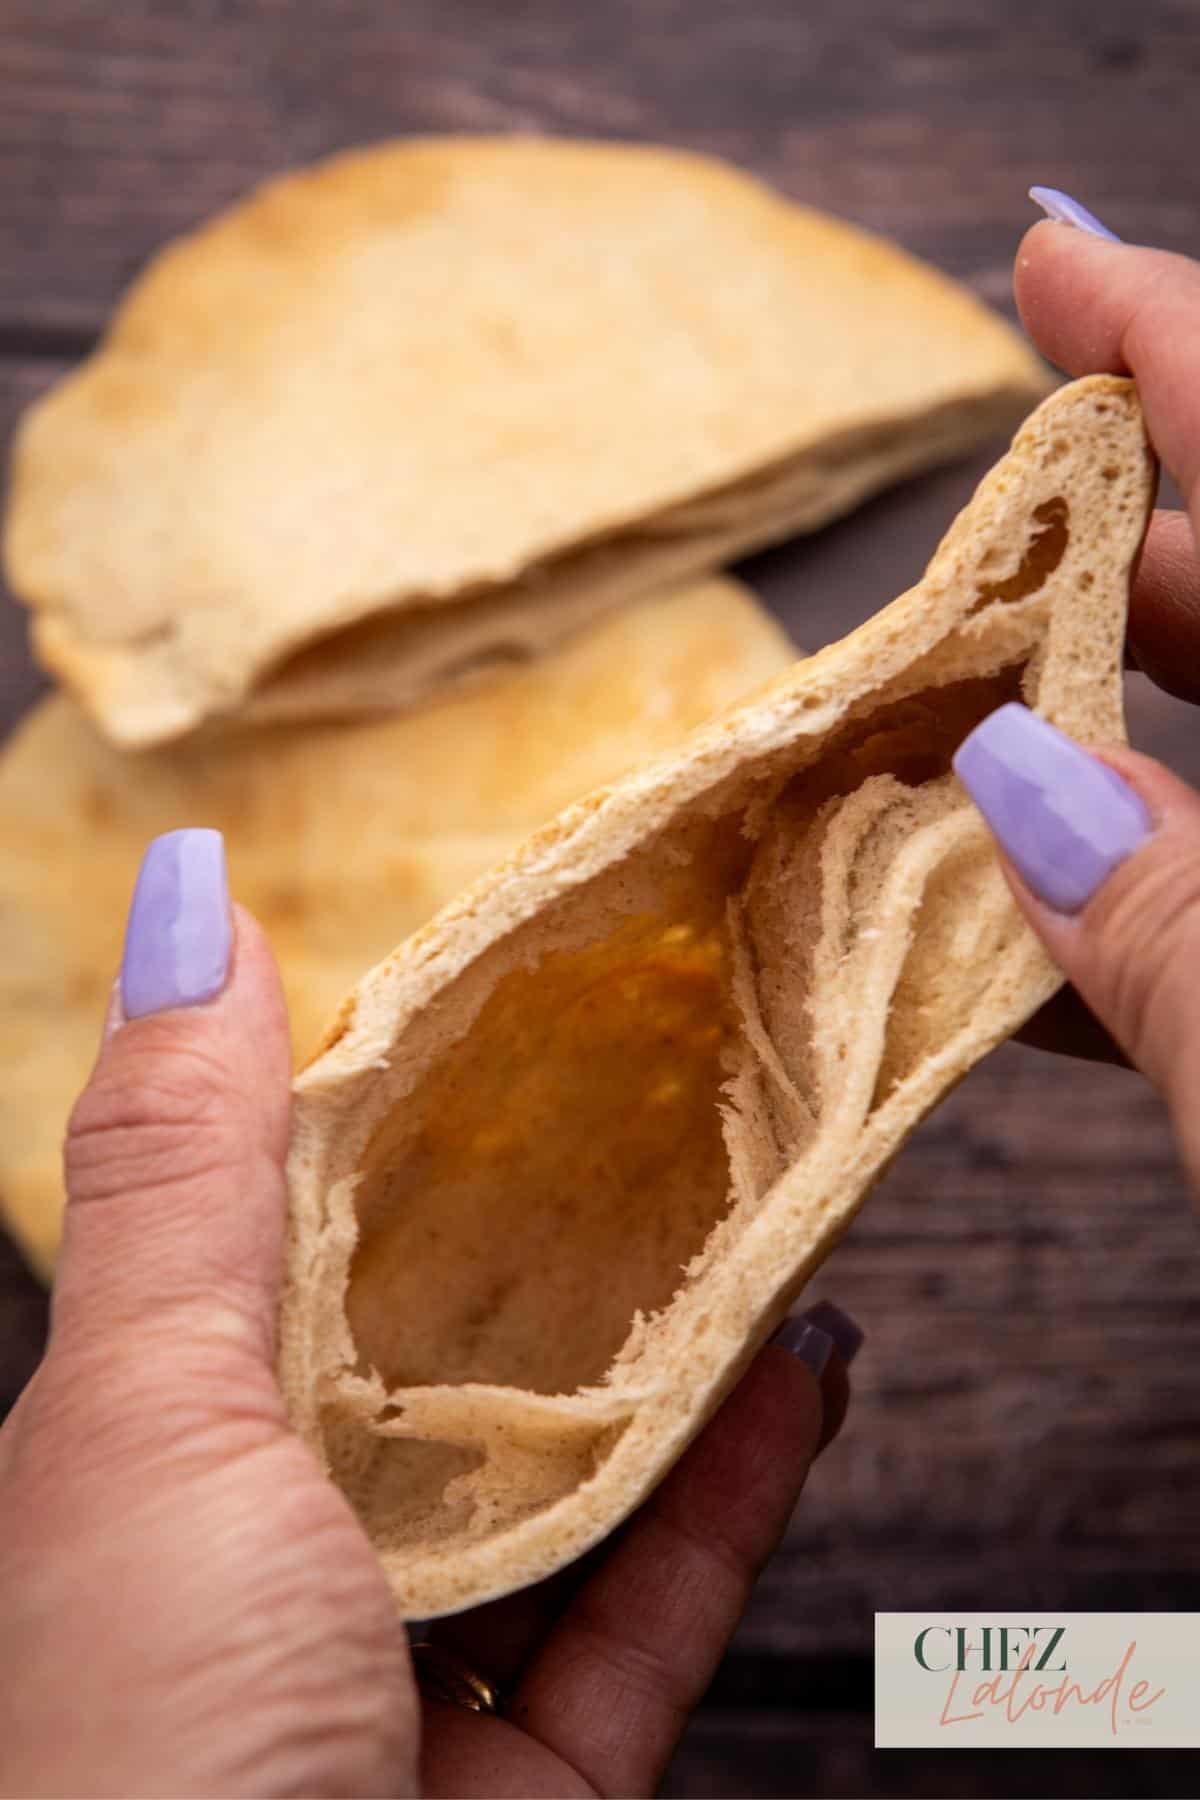 A cut open pita and this picture is showcasing what inside the pita bread looks like. 